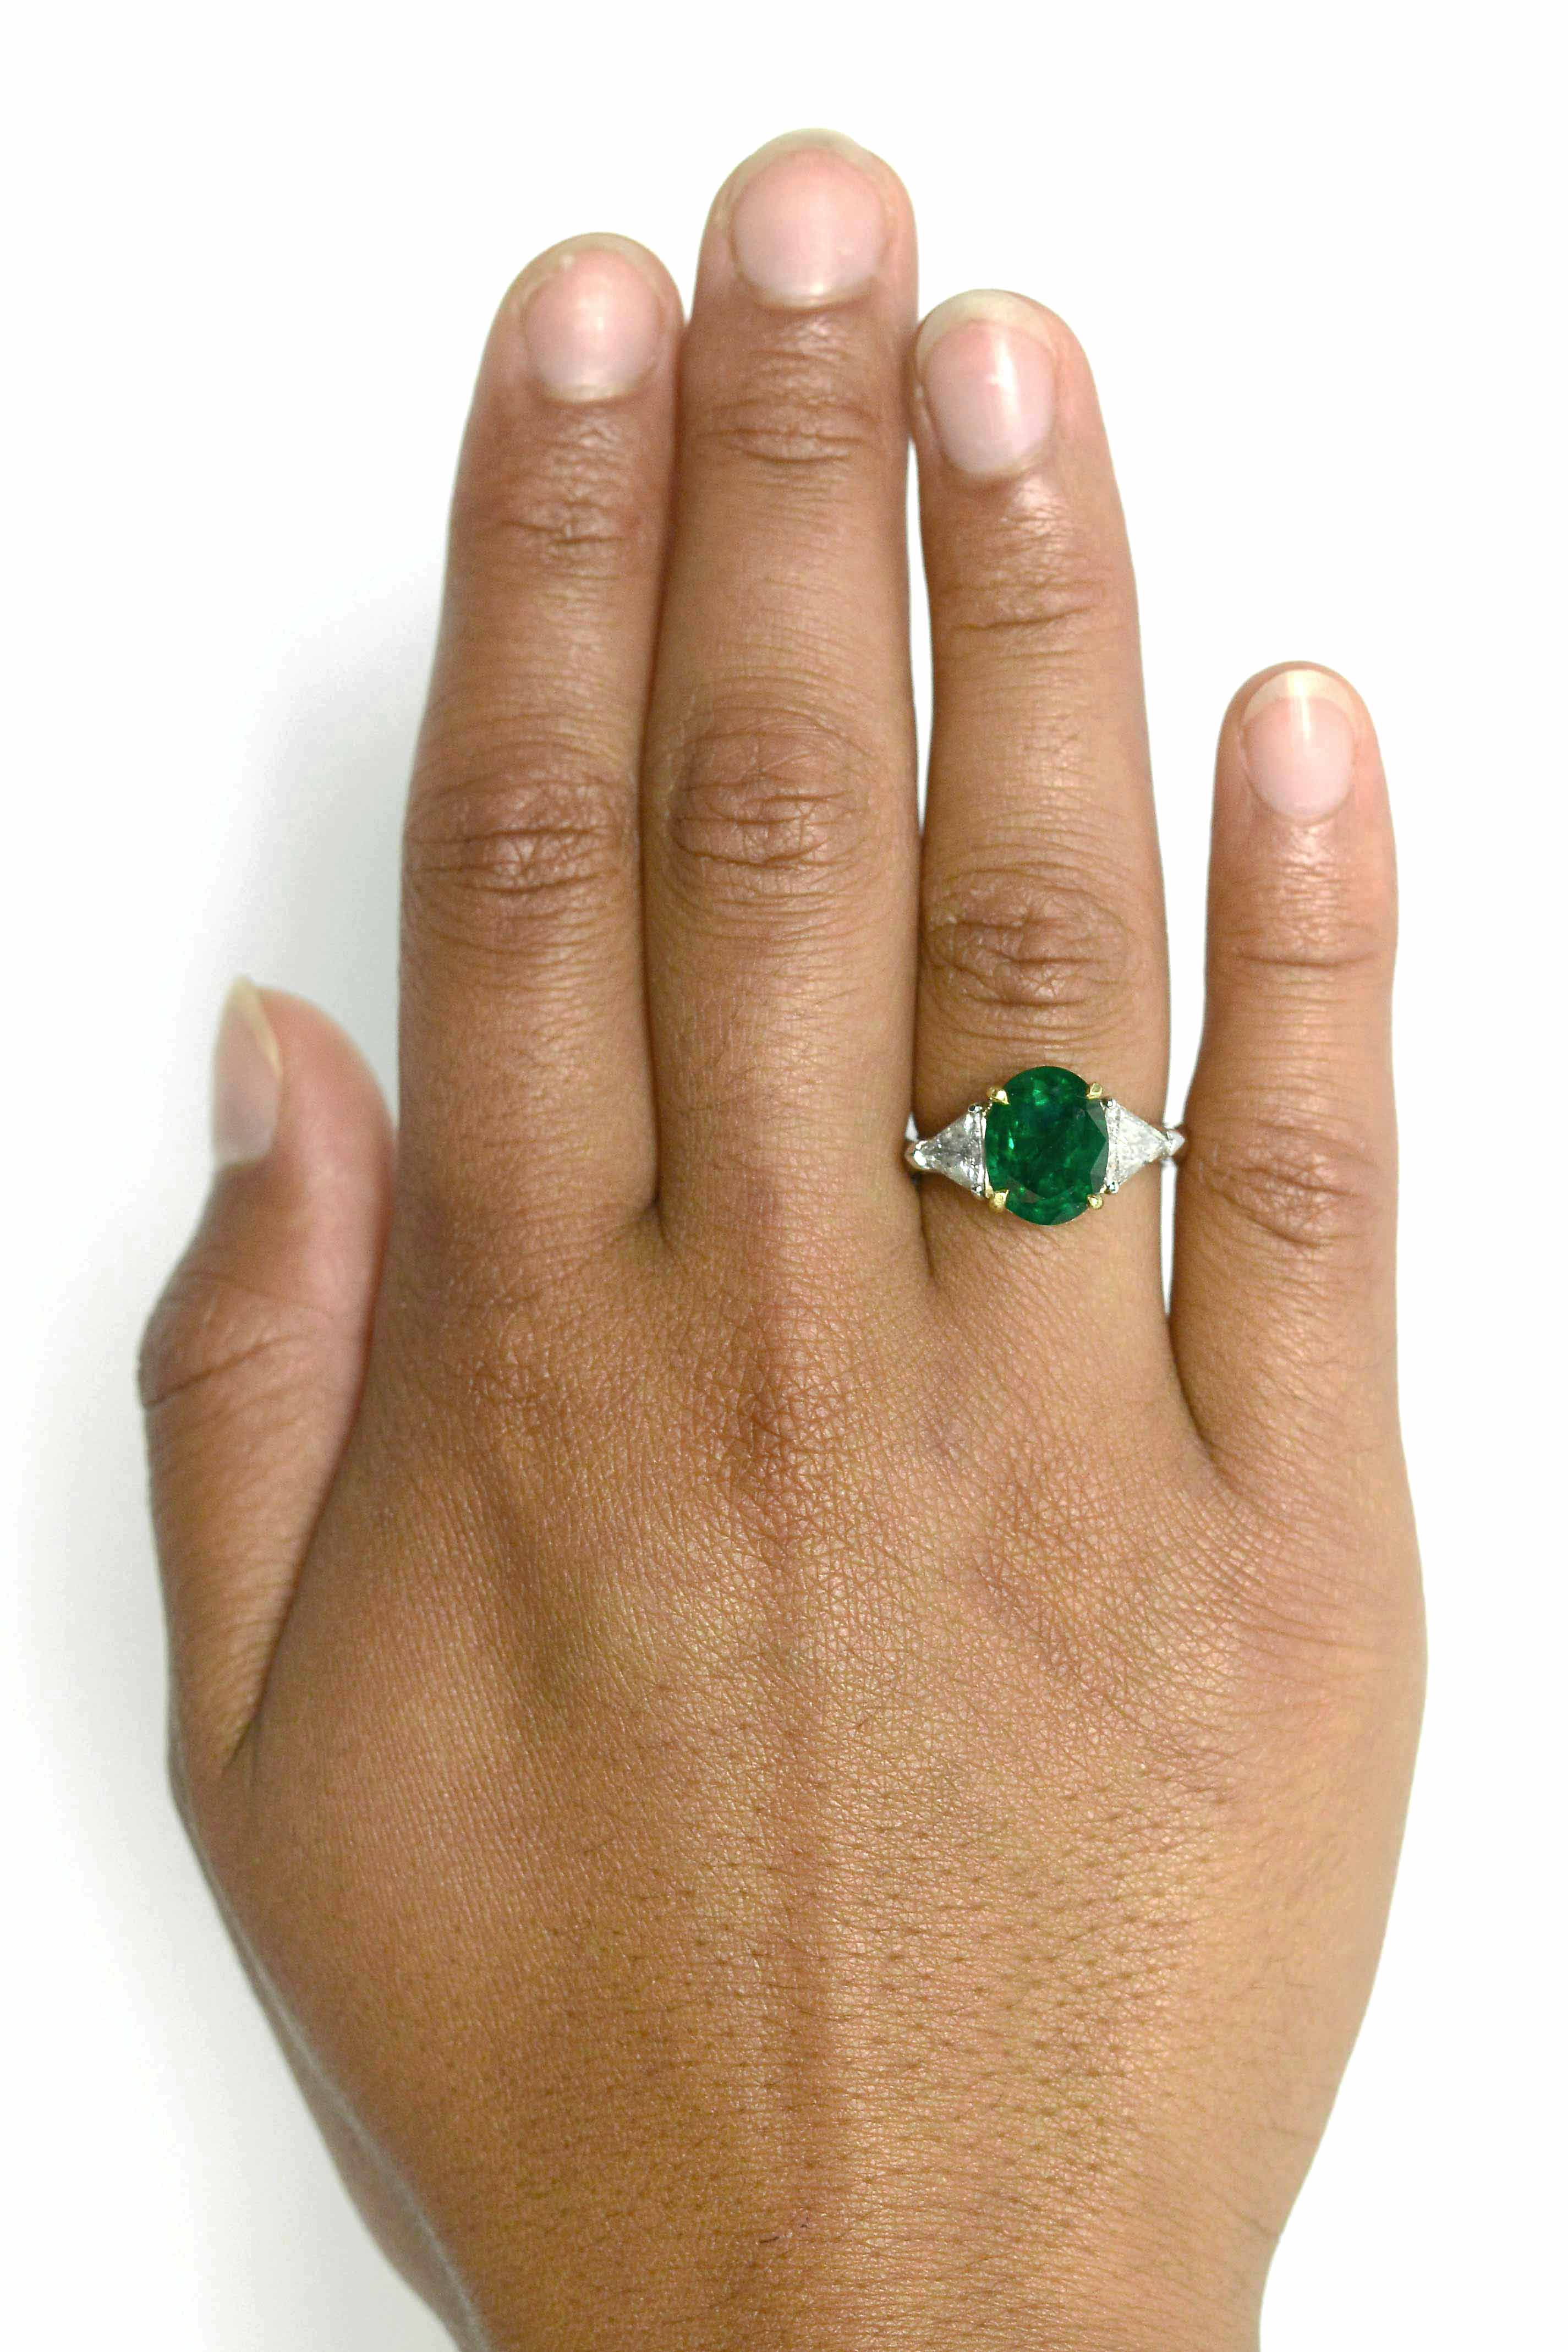 4 prongs secure the emerald of over 3 carats in this modern engagement ring.